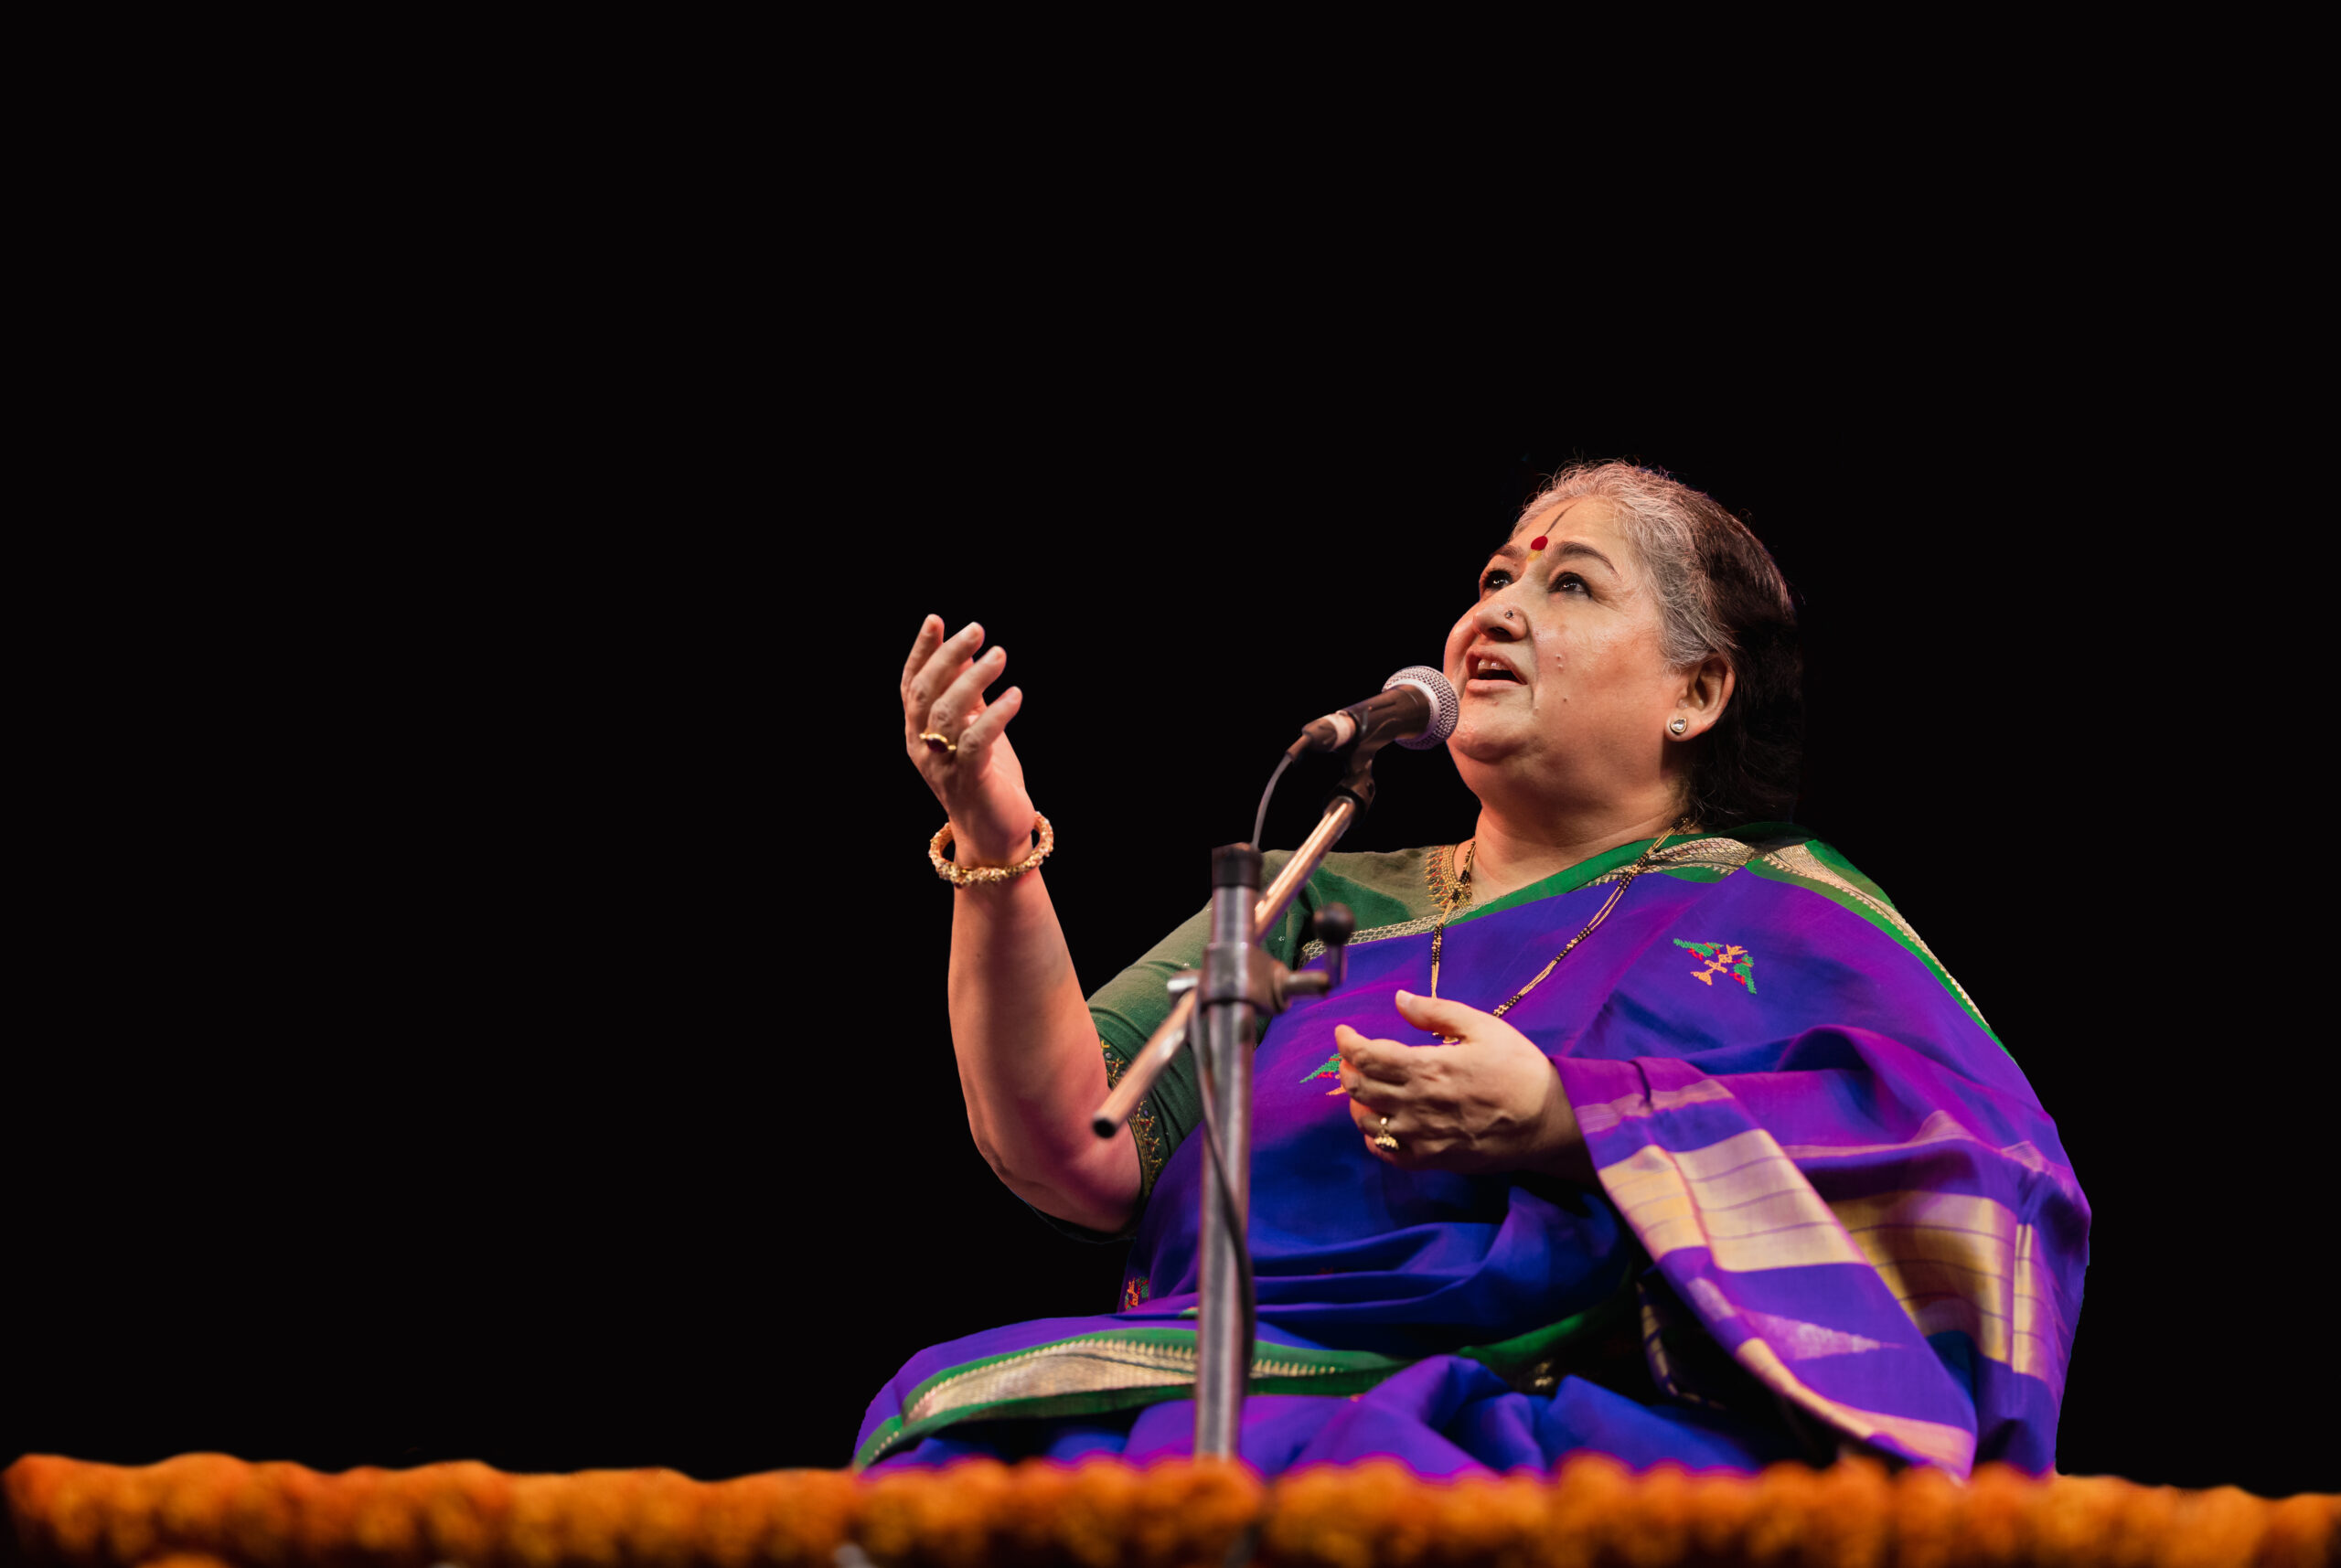 I was fortunate to learn from great, generous gurus: Shubha Mudgal